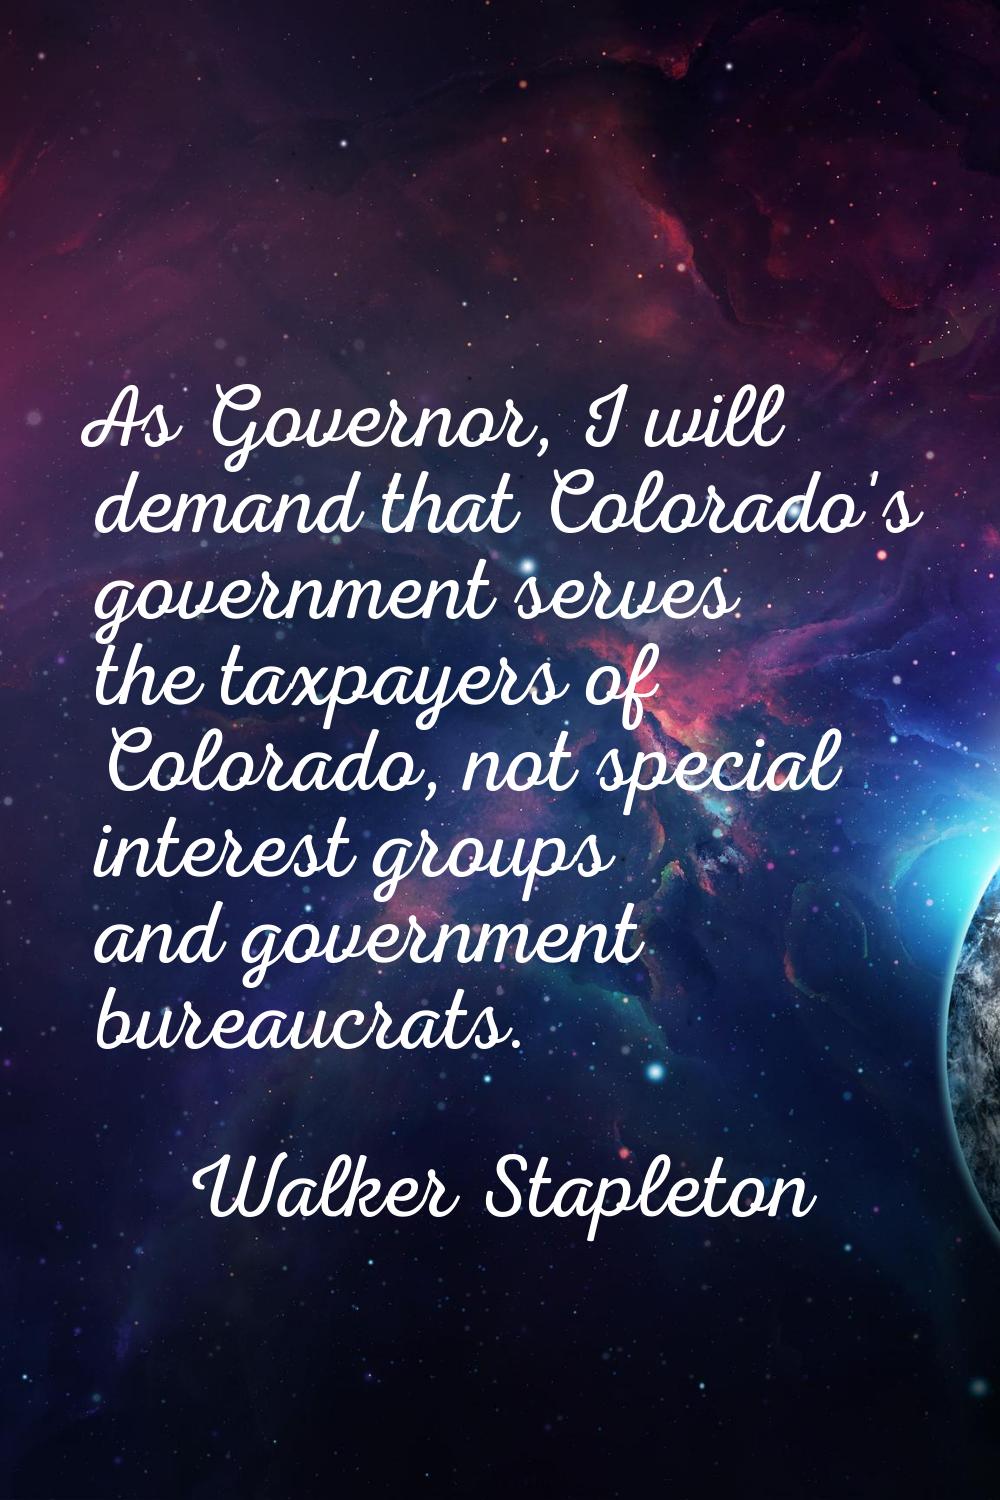 As Governor, I will demand that Colorado's government serves the taxpayers of Colorado, not special